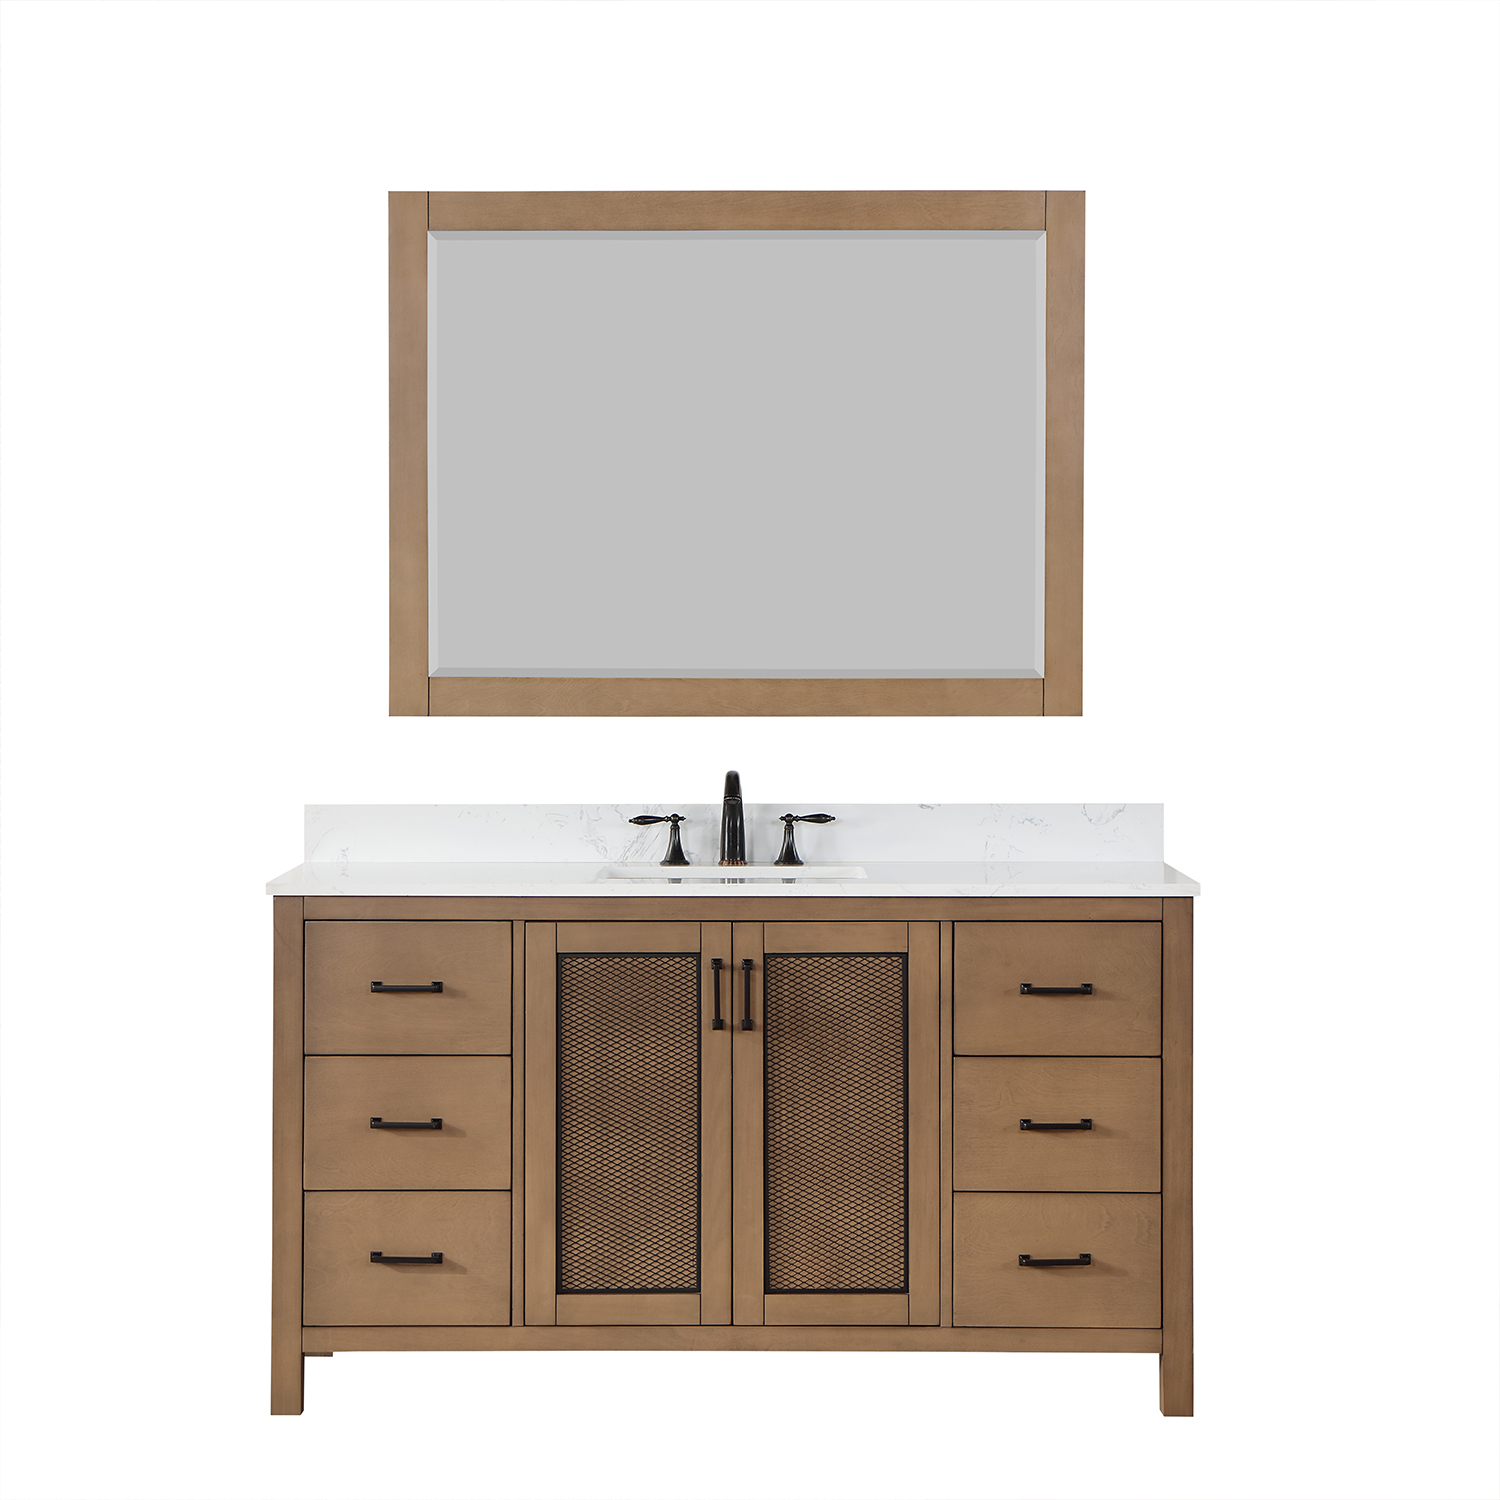 Issac Edwards Collection 60" Single Bathroom Vanity Set in Brown Pine with Carrara White Composite Stone Countertop without Mirror 